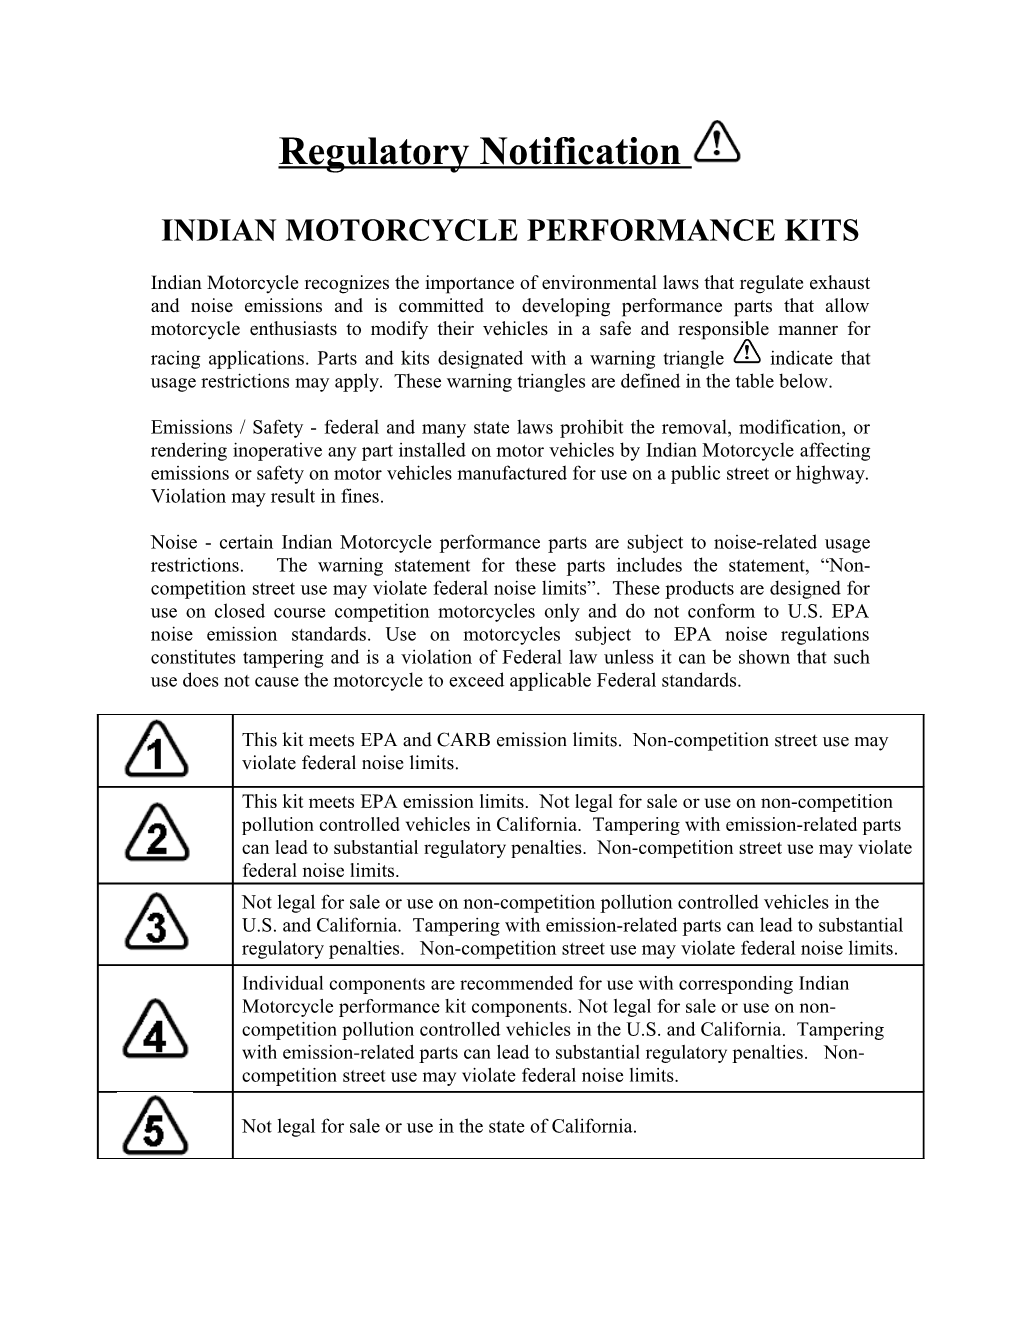 Indian Motorcycle Performance Kits